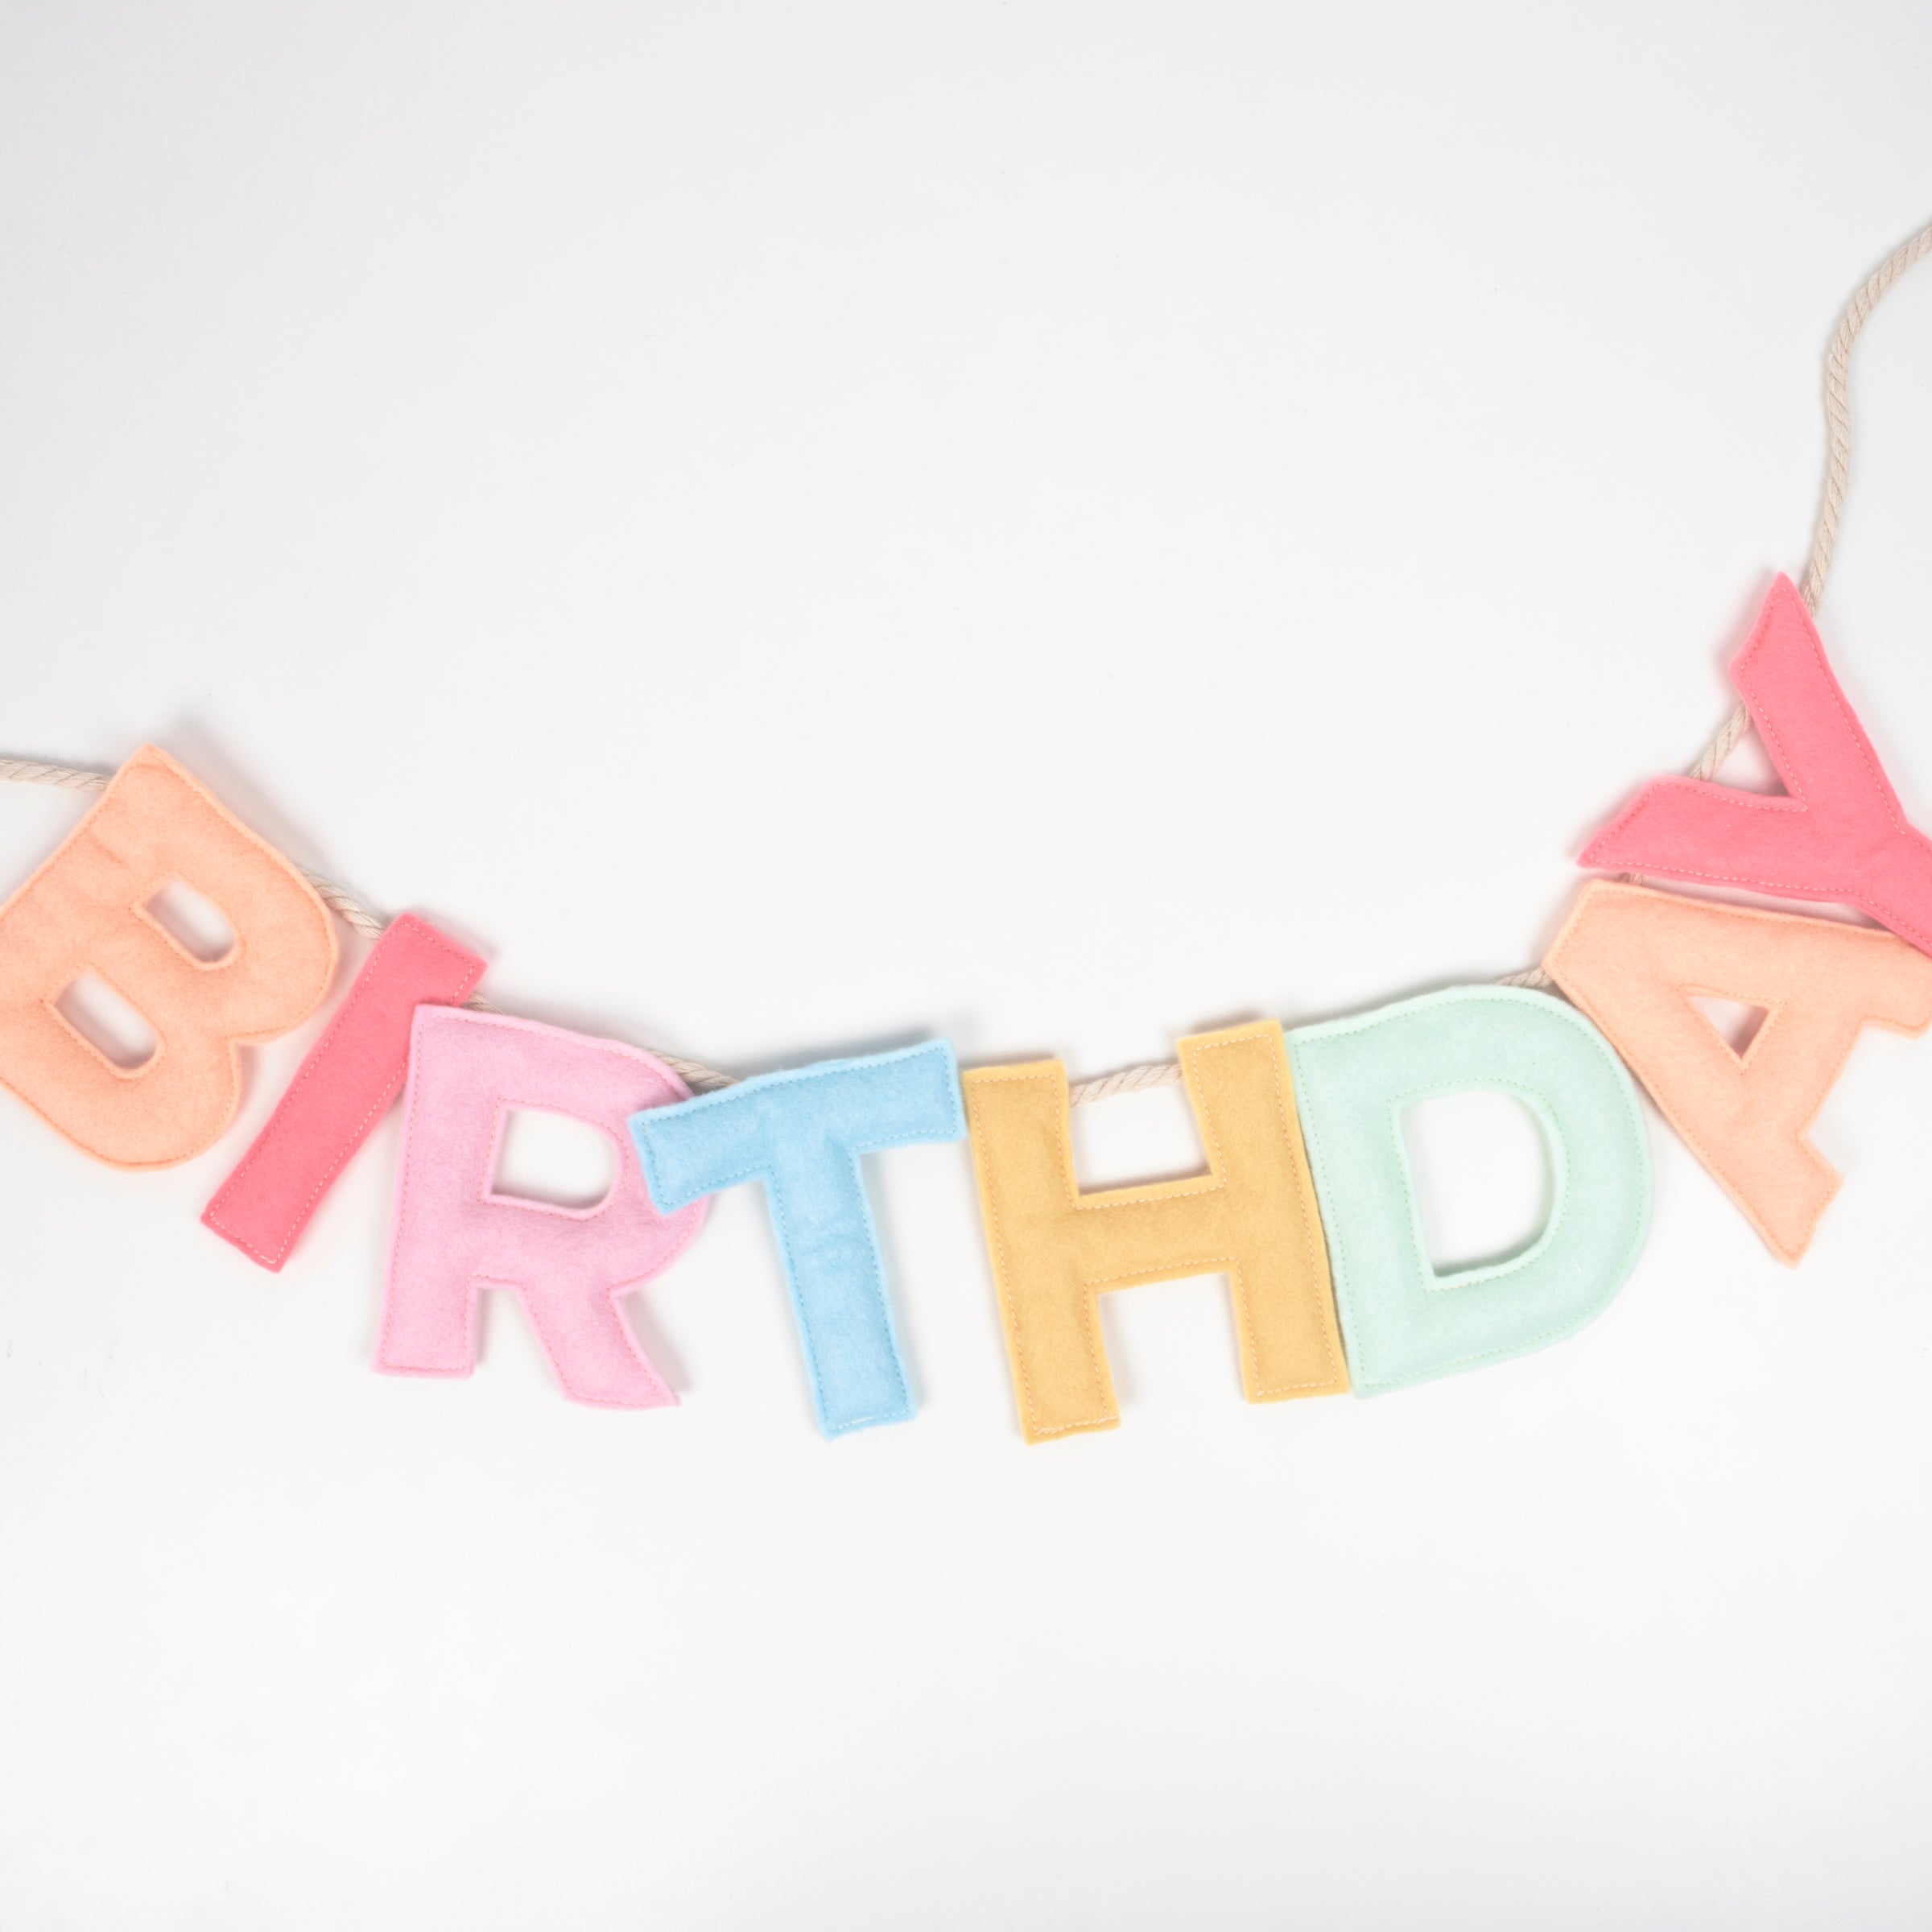 Our decorative garland, with the words Happy Birthday crafted in felt letters, is a wonderful birthday table decoration.